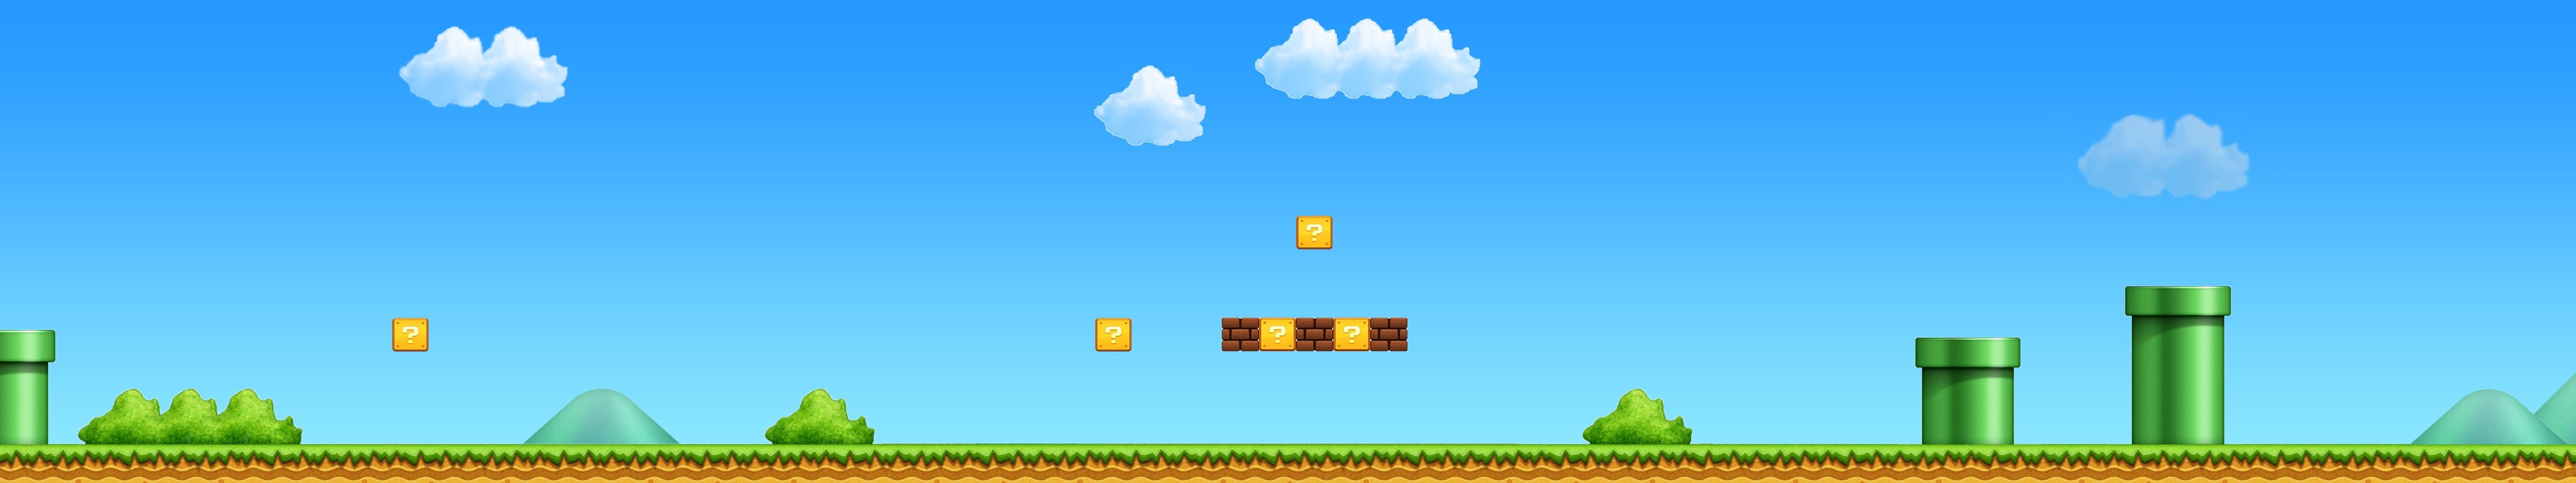 Simple Mario Level Background by Flayh